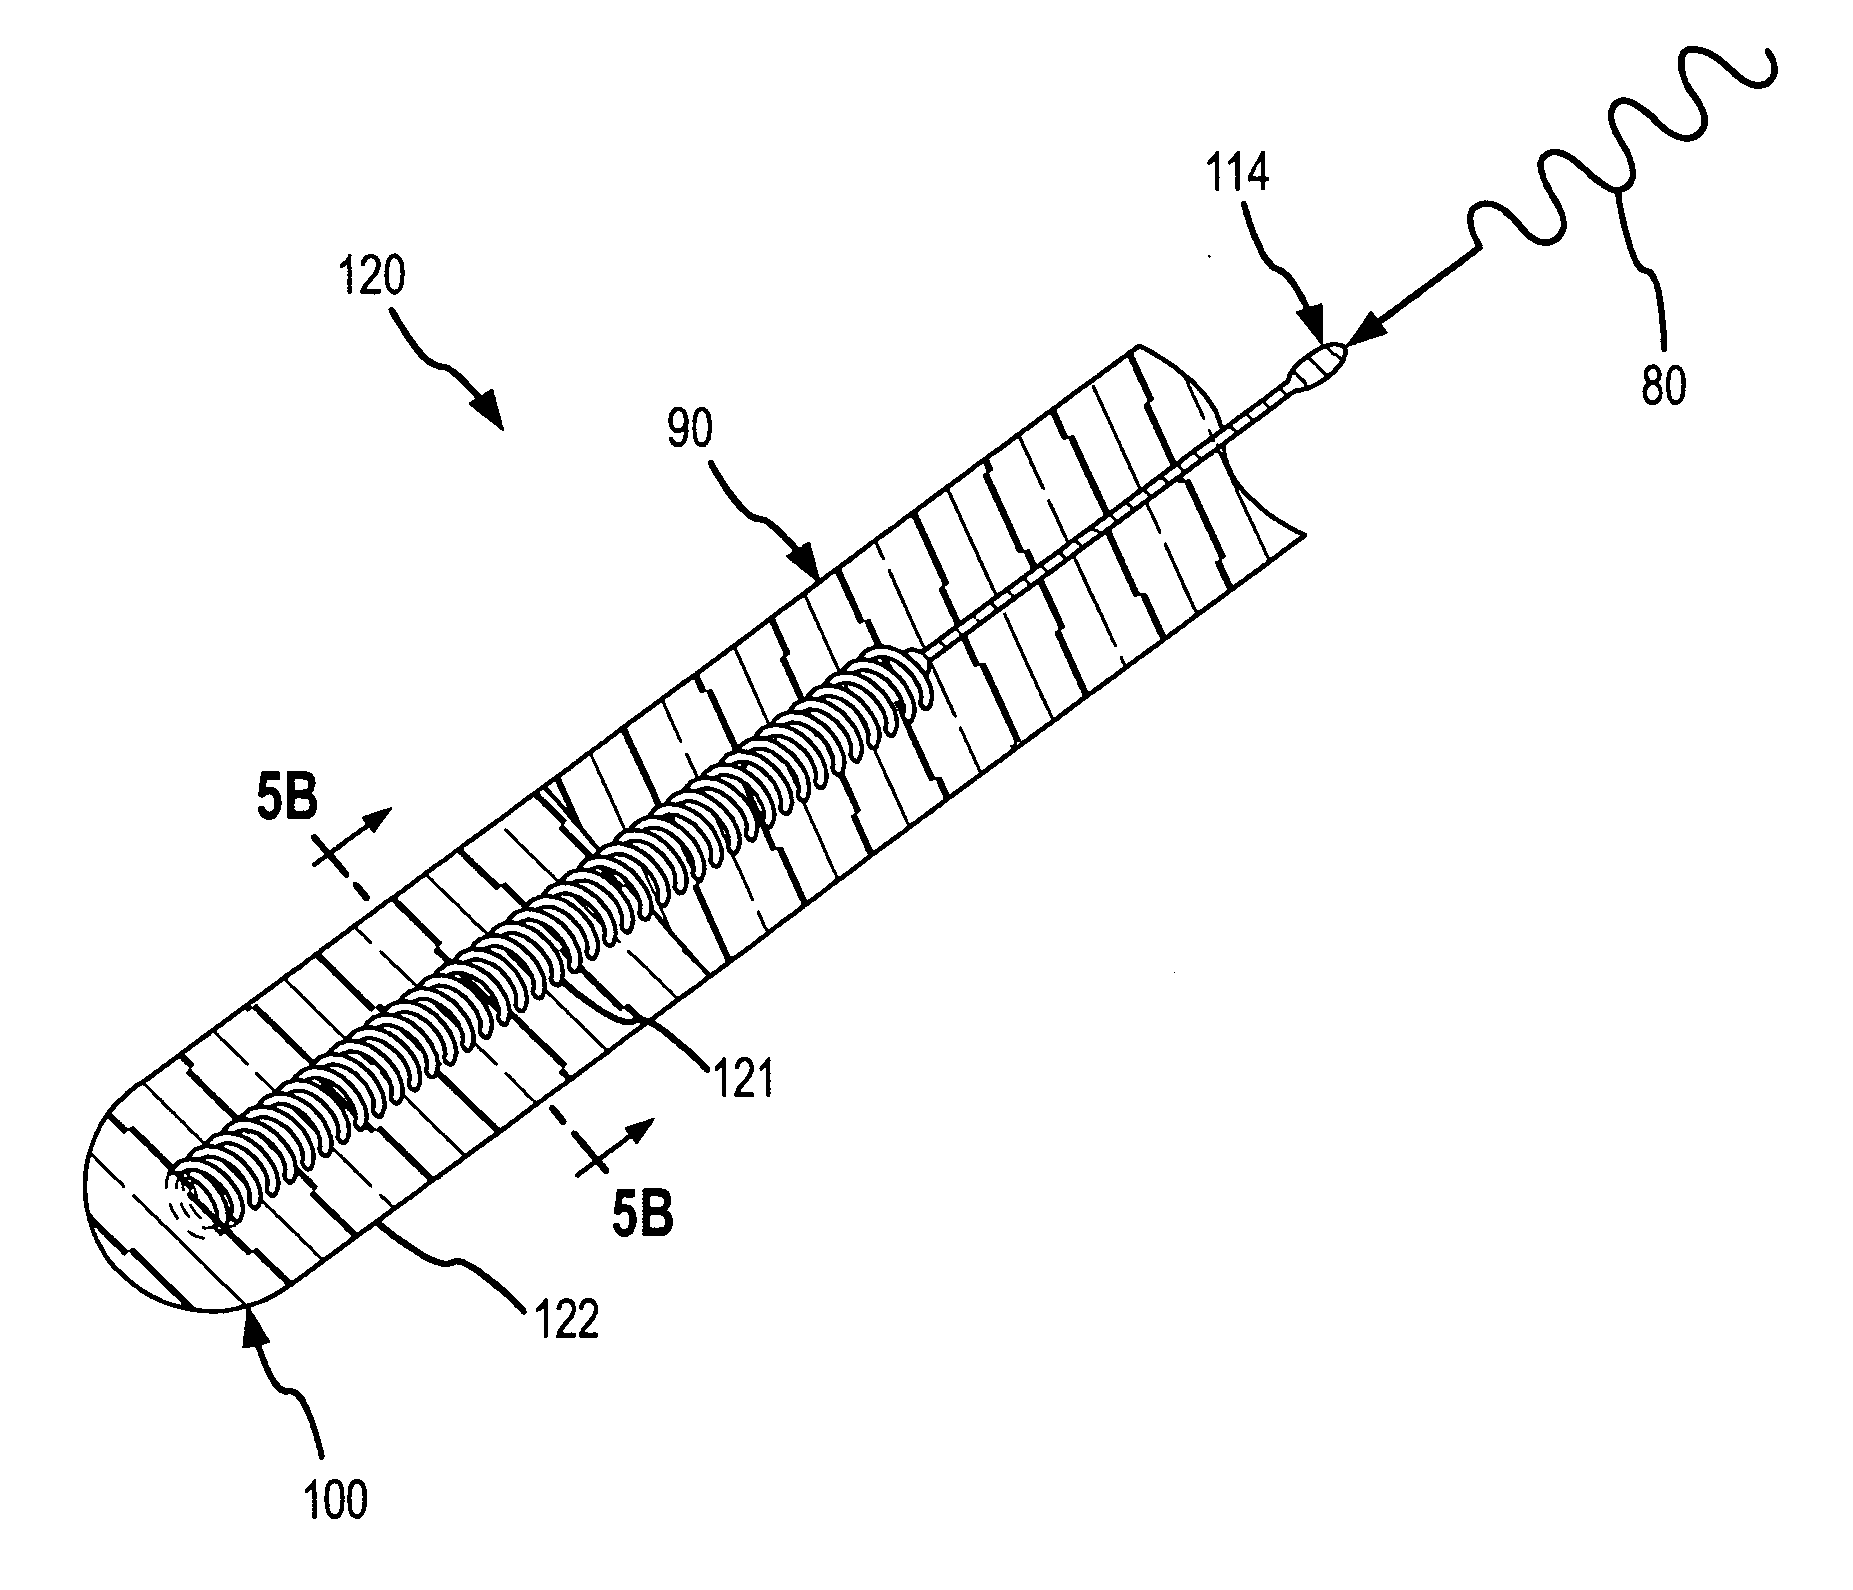 Contact-sensitive pressure-sensitive conductive composite electrode and method for ablation